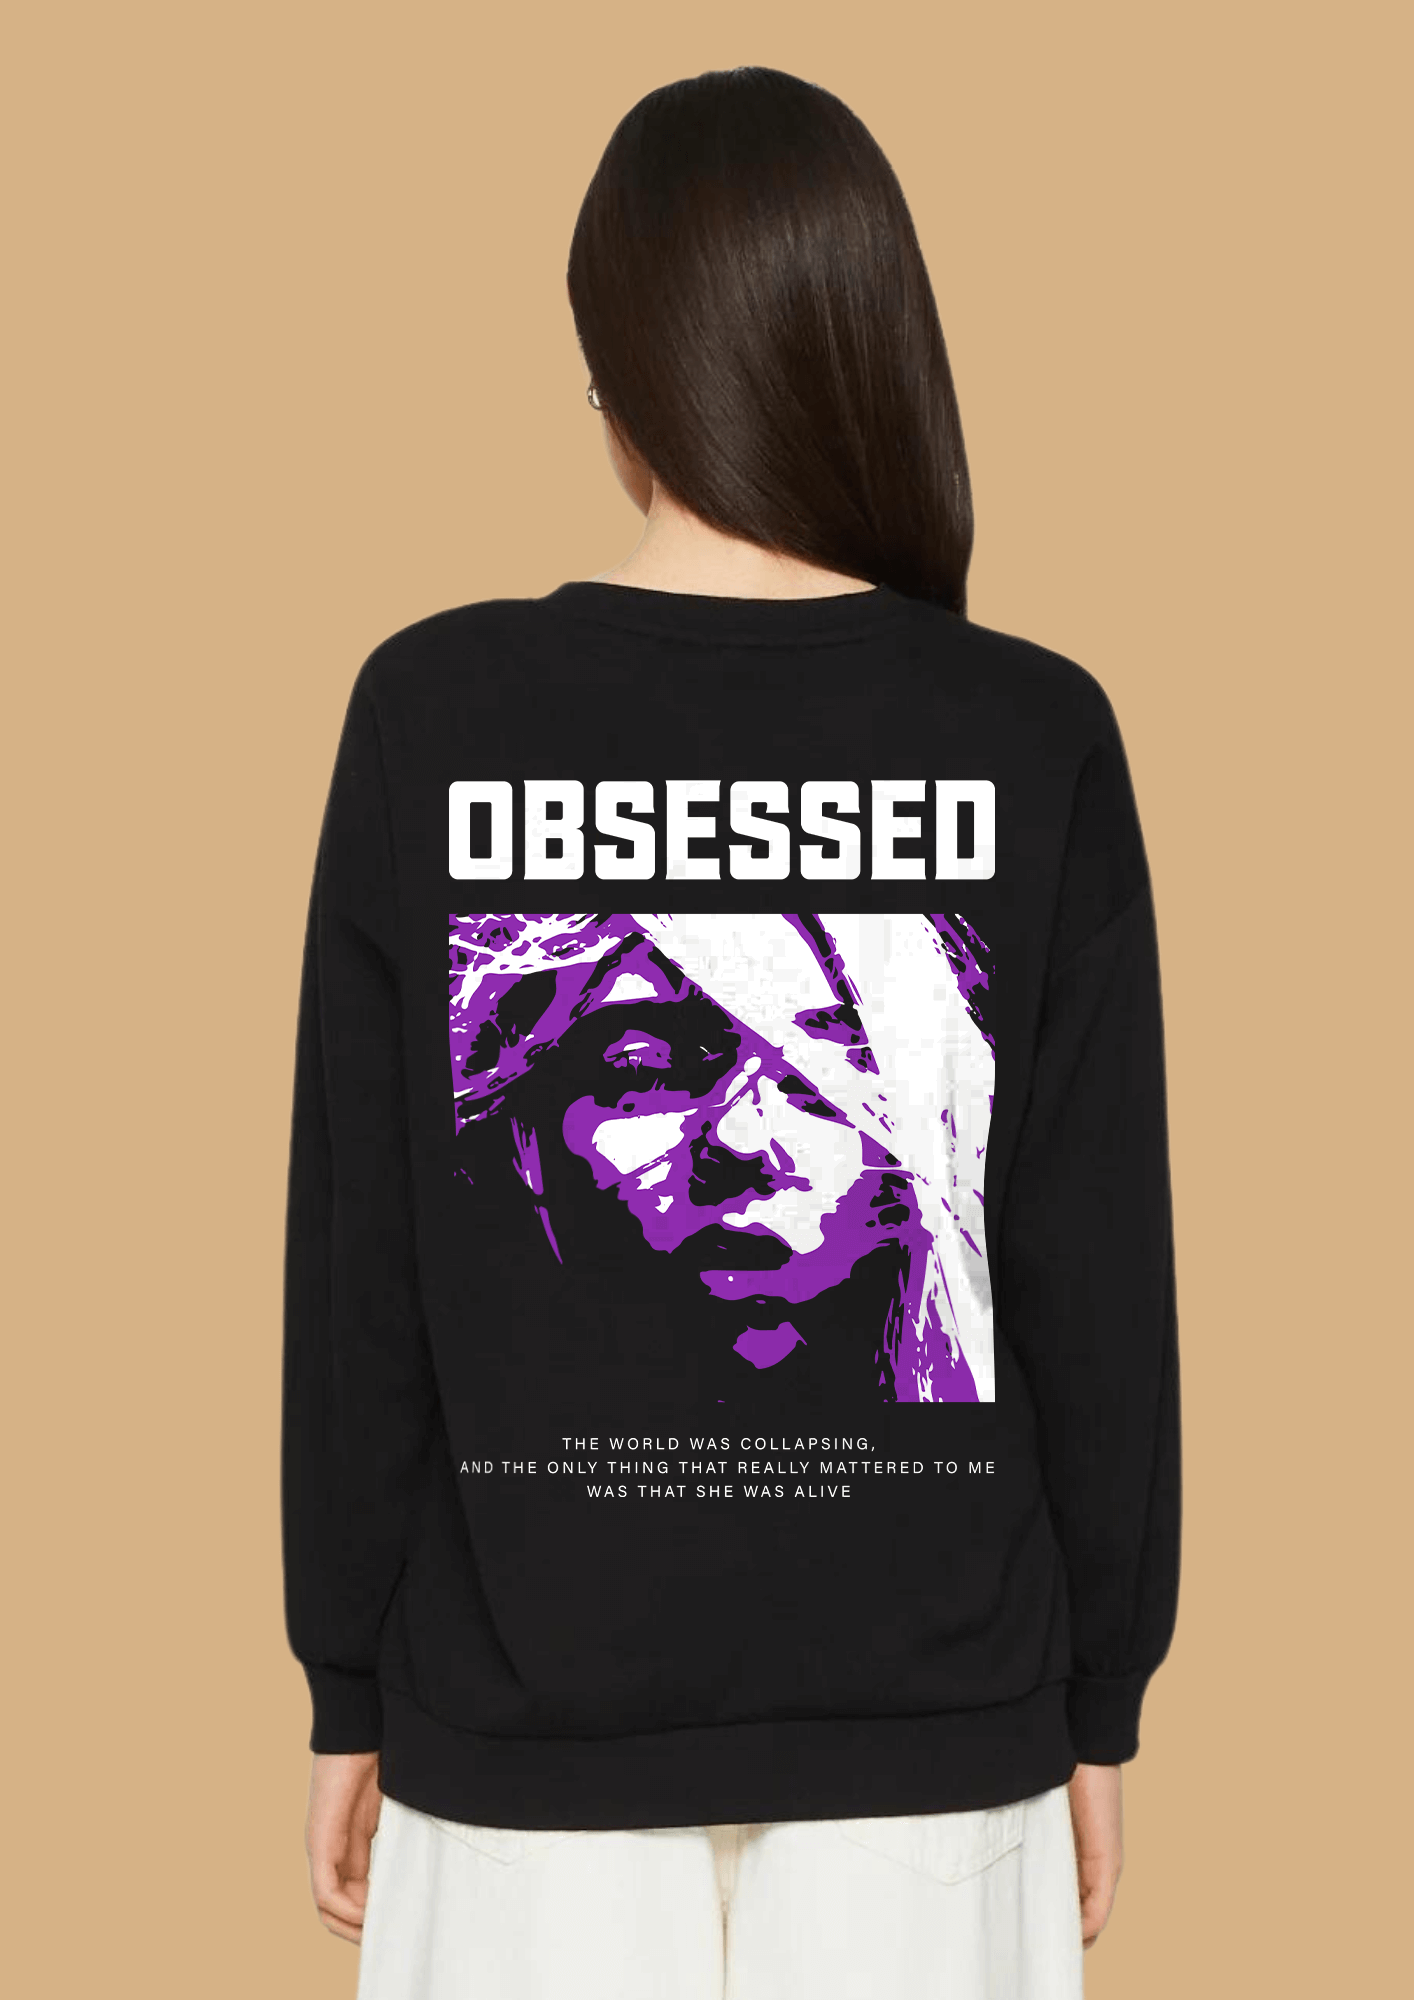 Obsessed Printed black color sweatshirt by offmint